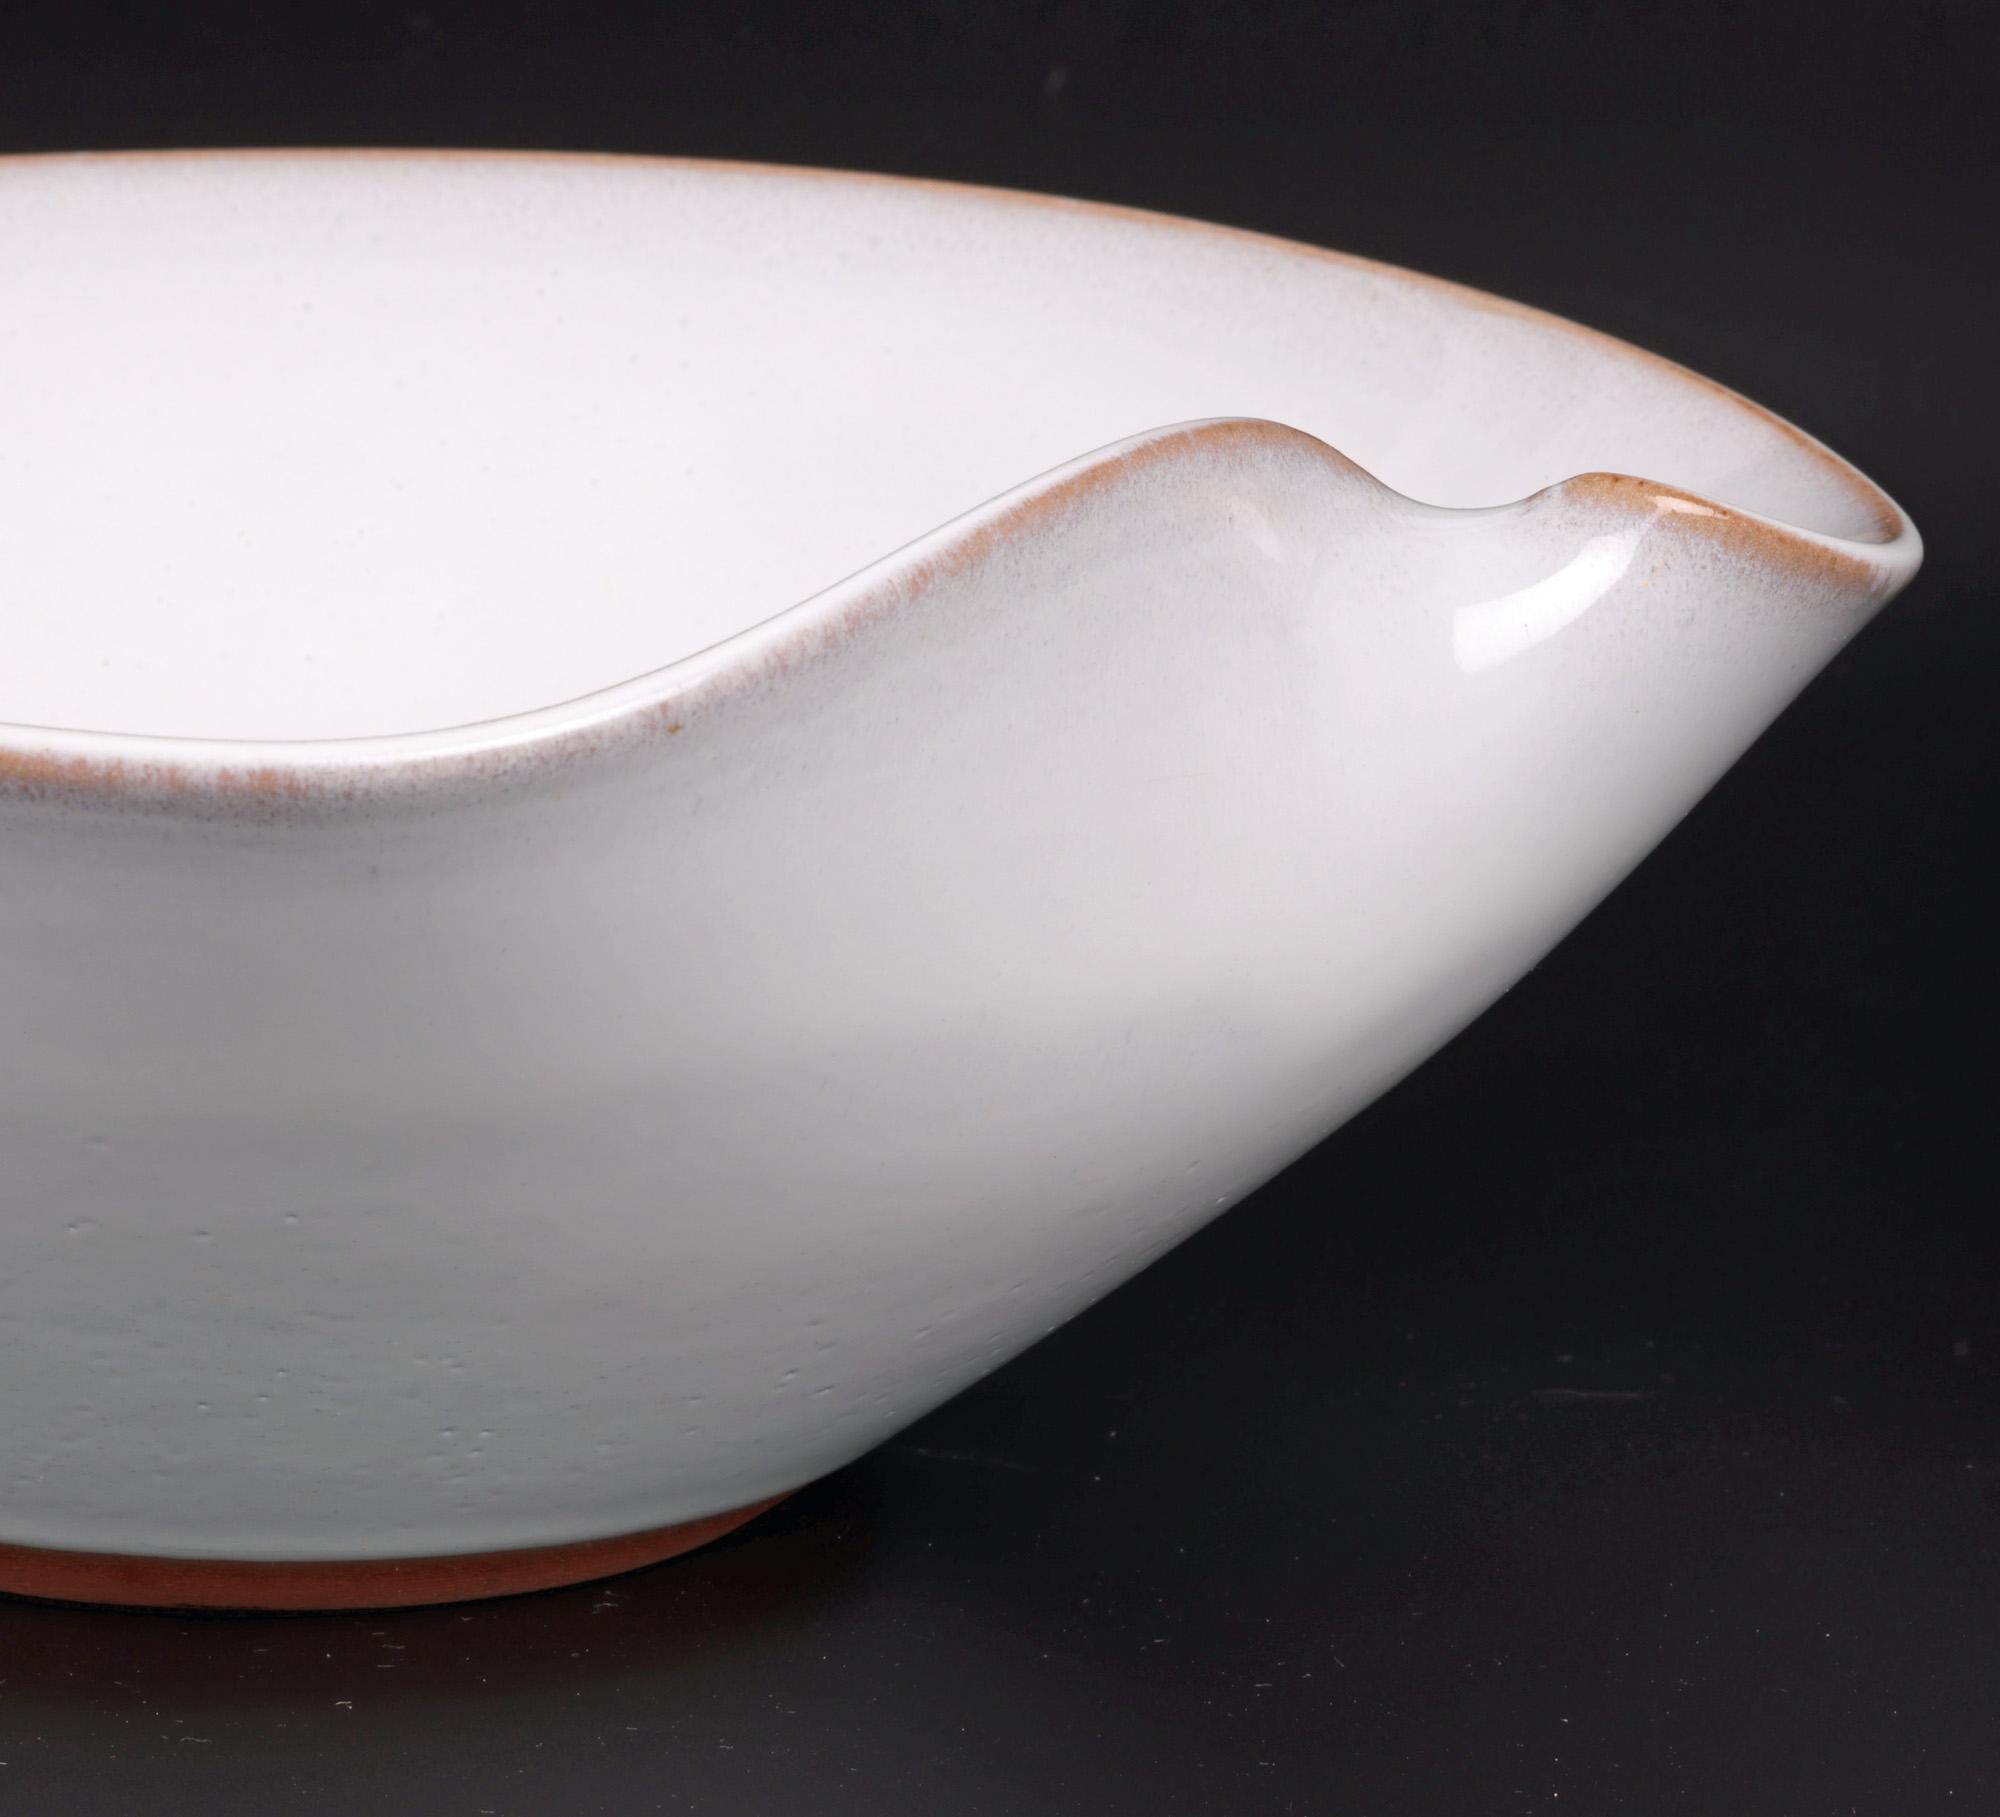 A large and impressive Japanese white glazed orangic shaped studio pottery bowl dating from the 20th century. The heavily made stoneware bowl is of deep rounded shape with kinked rim formed as thumb rest to enable the bowl to be easily balanced and